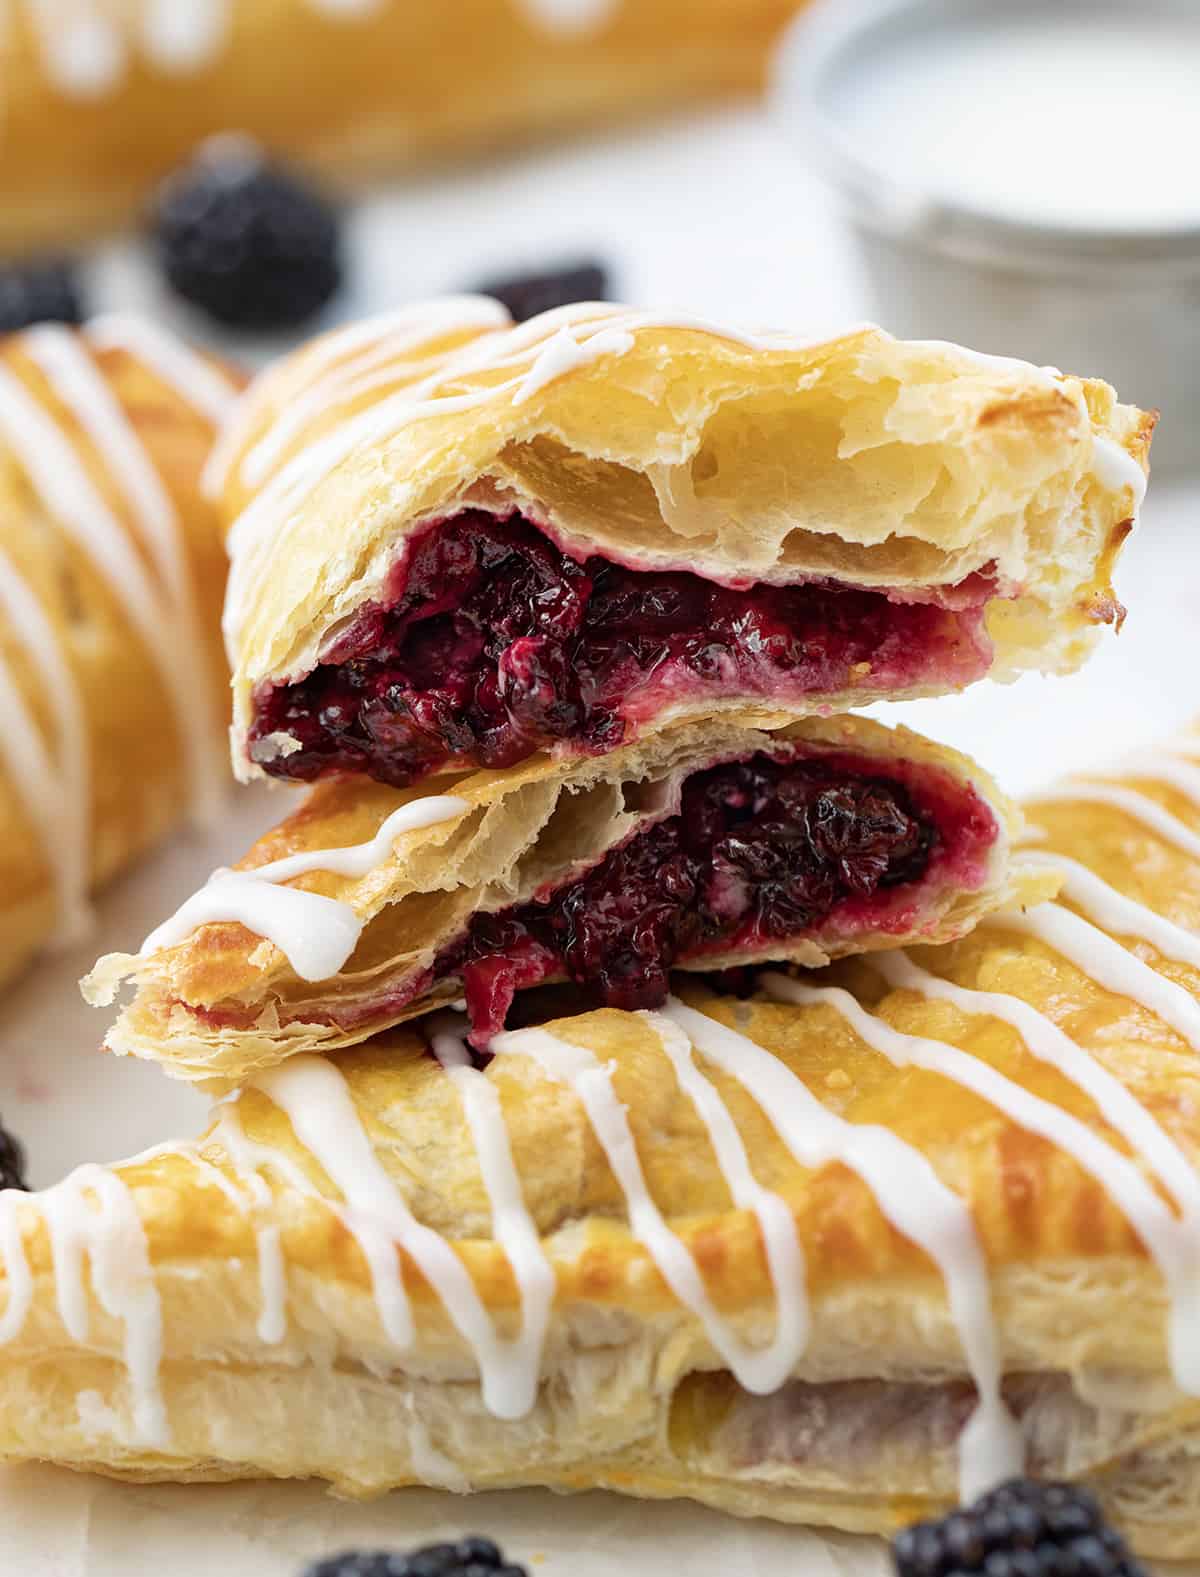 A Cut in Half Blackberry Cream Cheese Turnover on Top of a Whole Blackberry Cream Cheese Turnover on a White Counter.